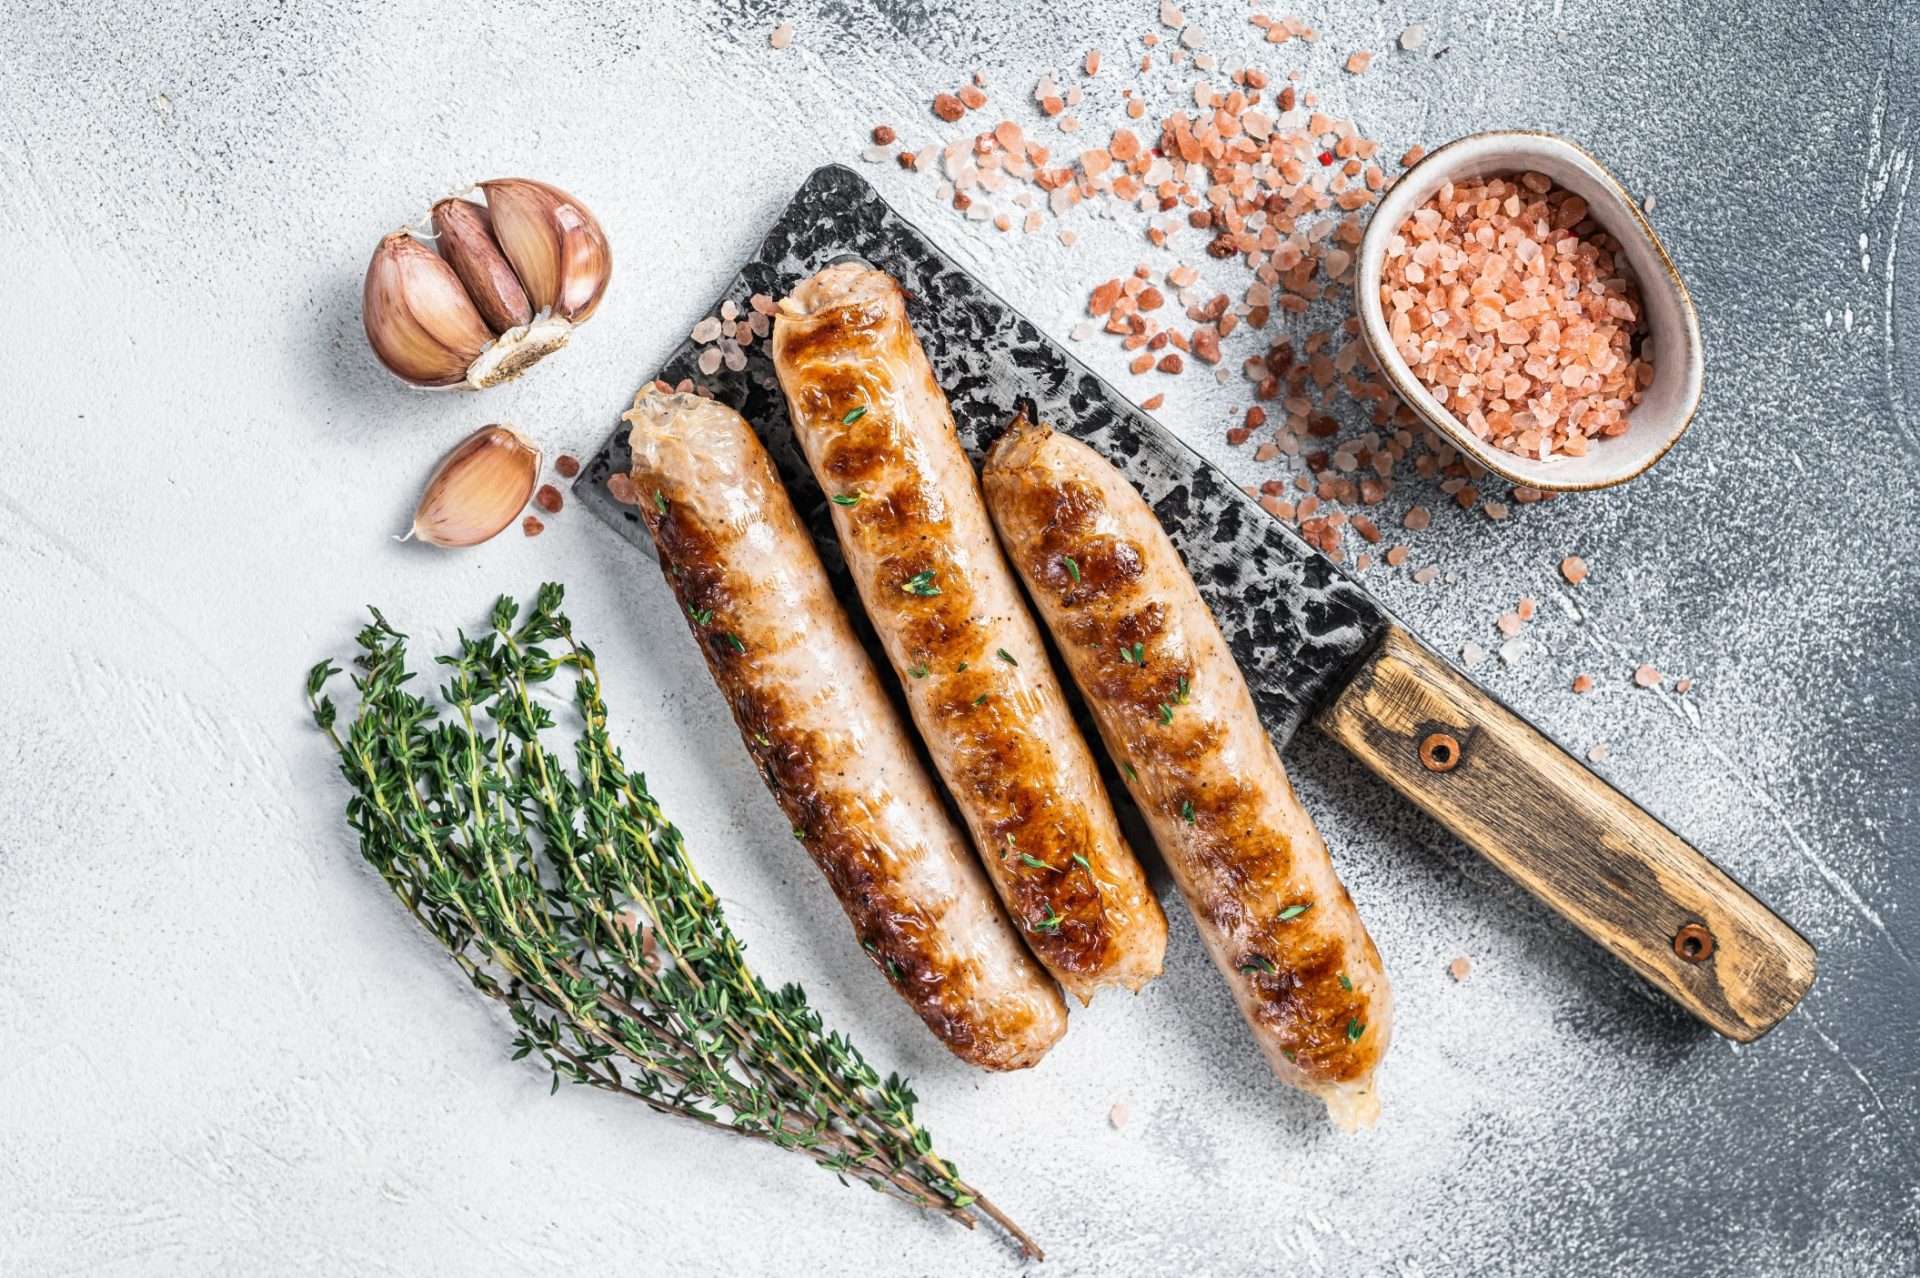 Flat lay image of bratwurst and cooking spices